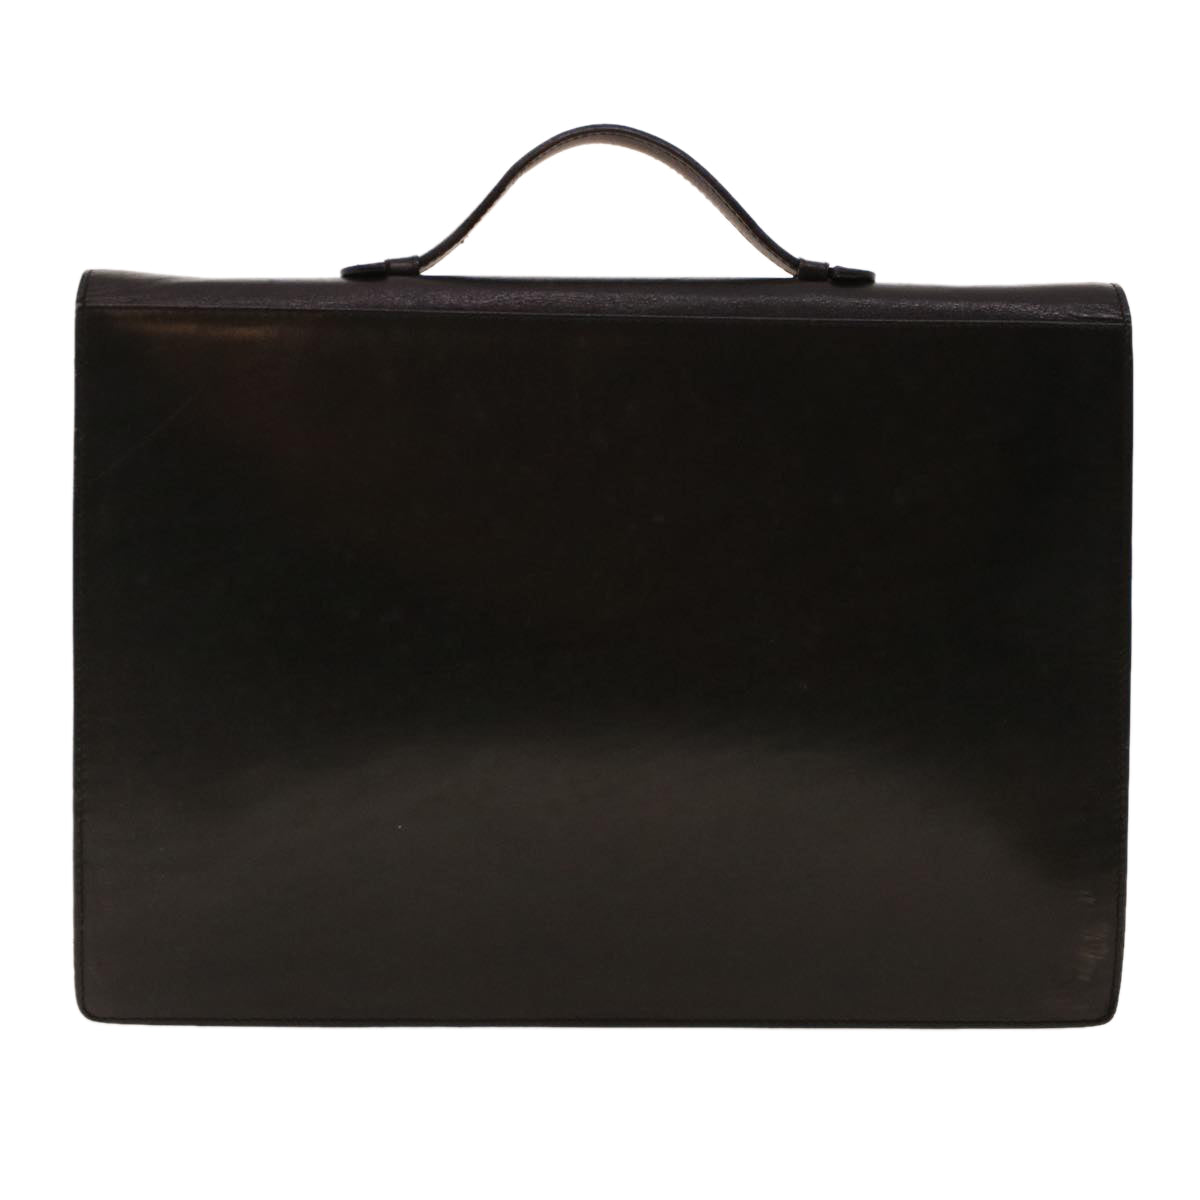 BALLY Business Bag Leather Black Auth bs5218